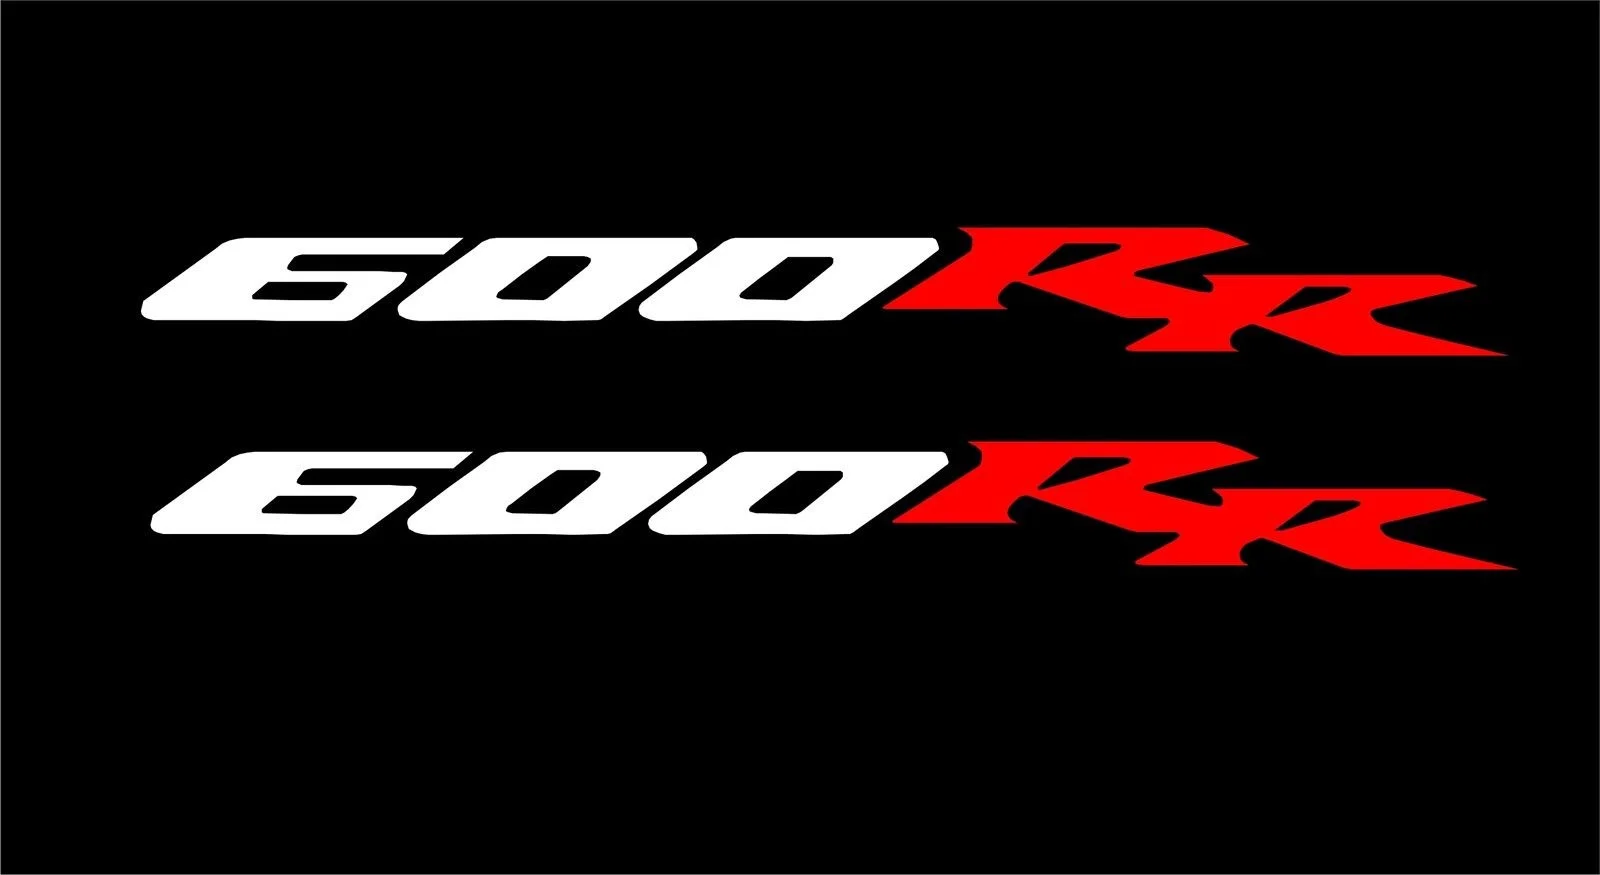 

For 4Pcs/Set CBR 600RR Fireblade Sticker Decal Motorcycle ANY COLOUR